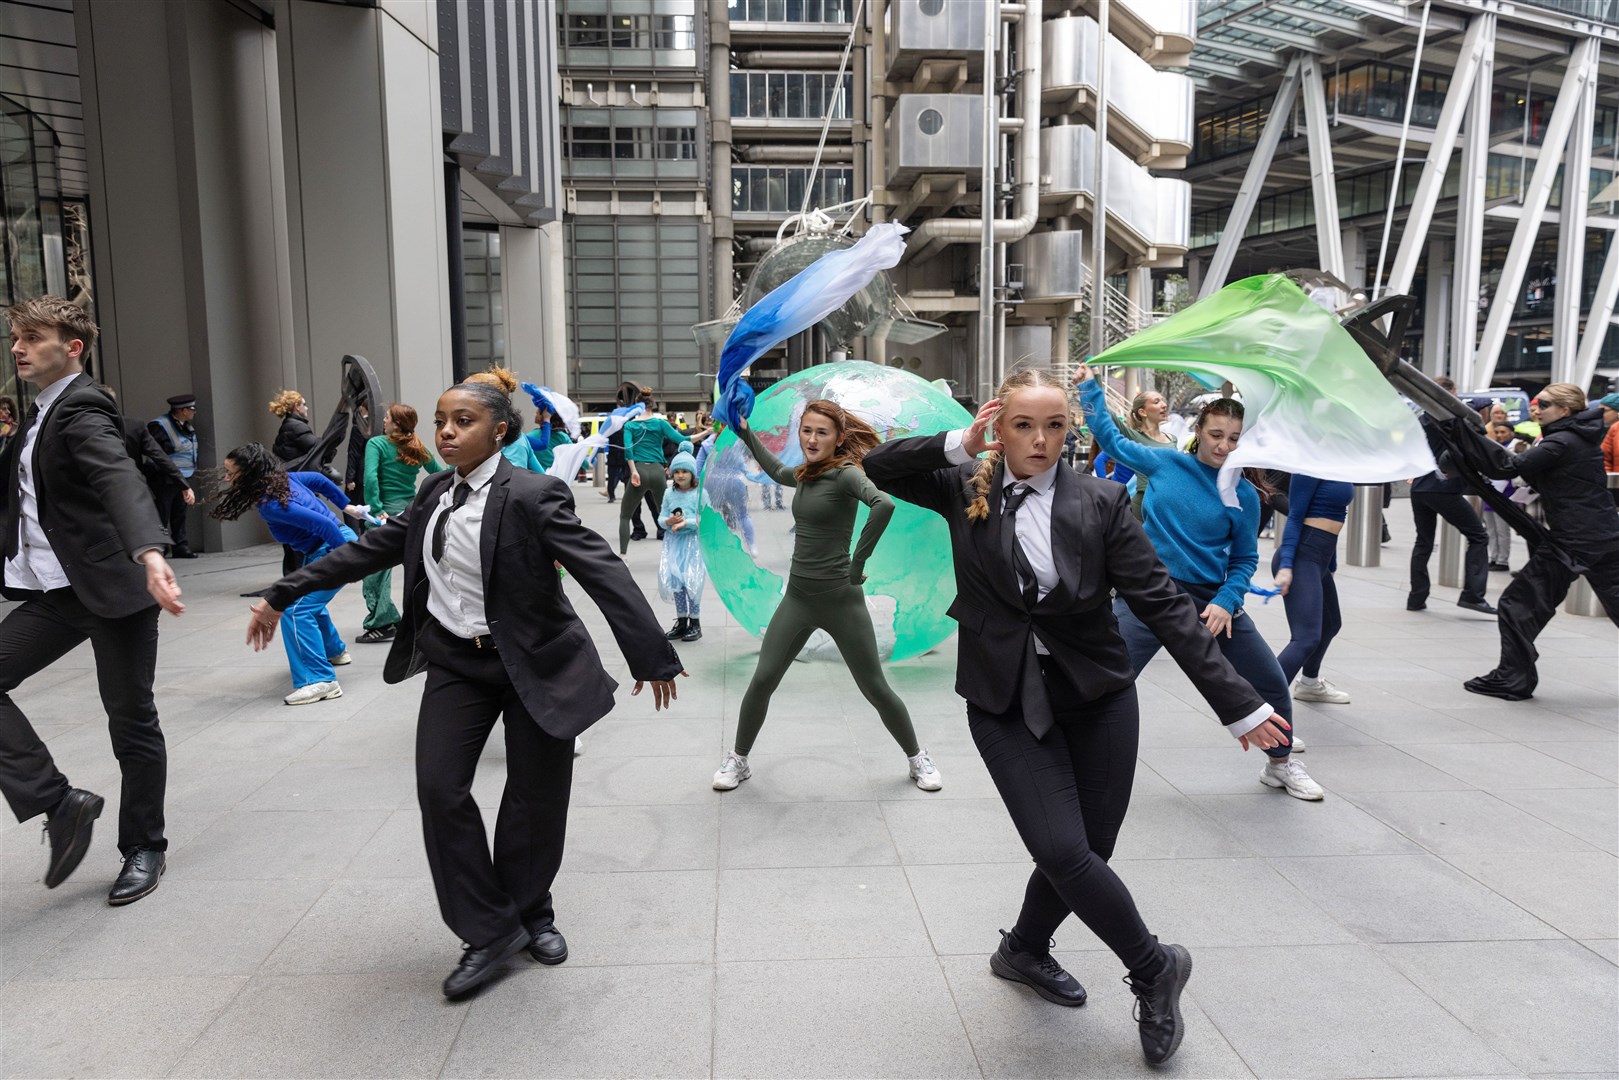 Mothers Rise Up staged a street performance outside Lloyd’s of London on Monday (Anna Gordon/Mothers Rise Up)